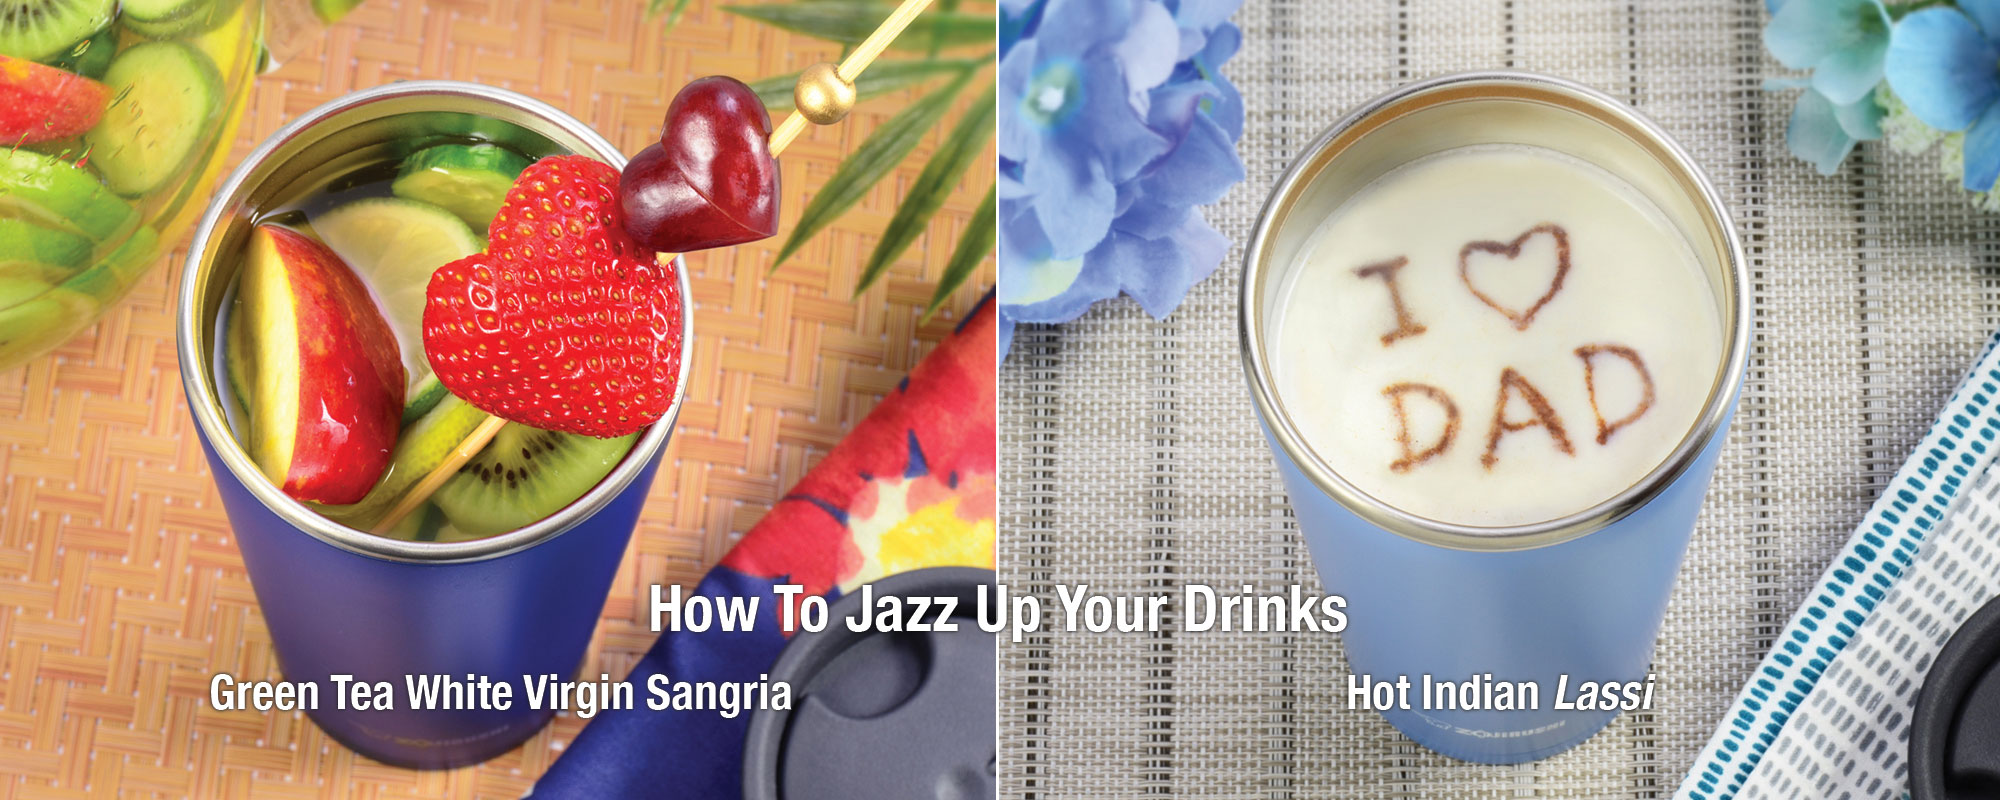 How To Jazz Up Your Drinks